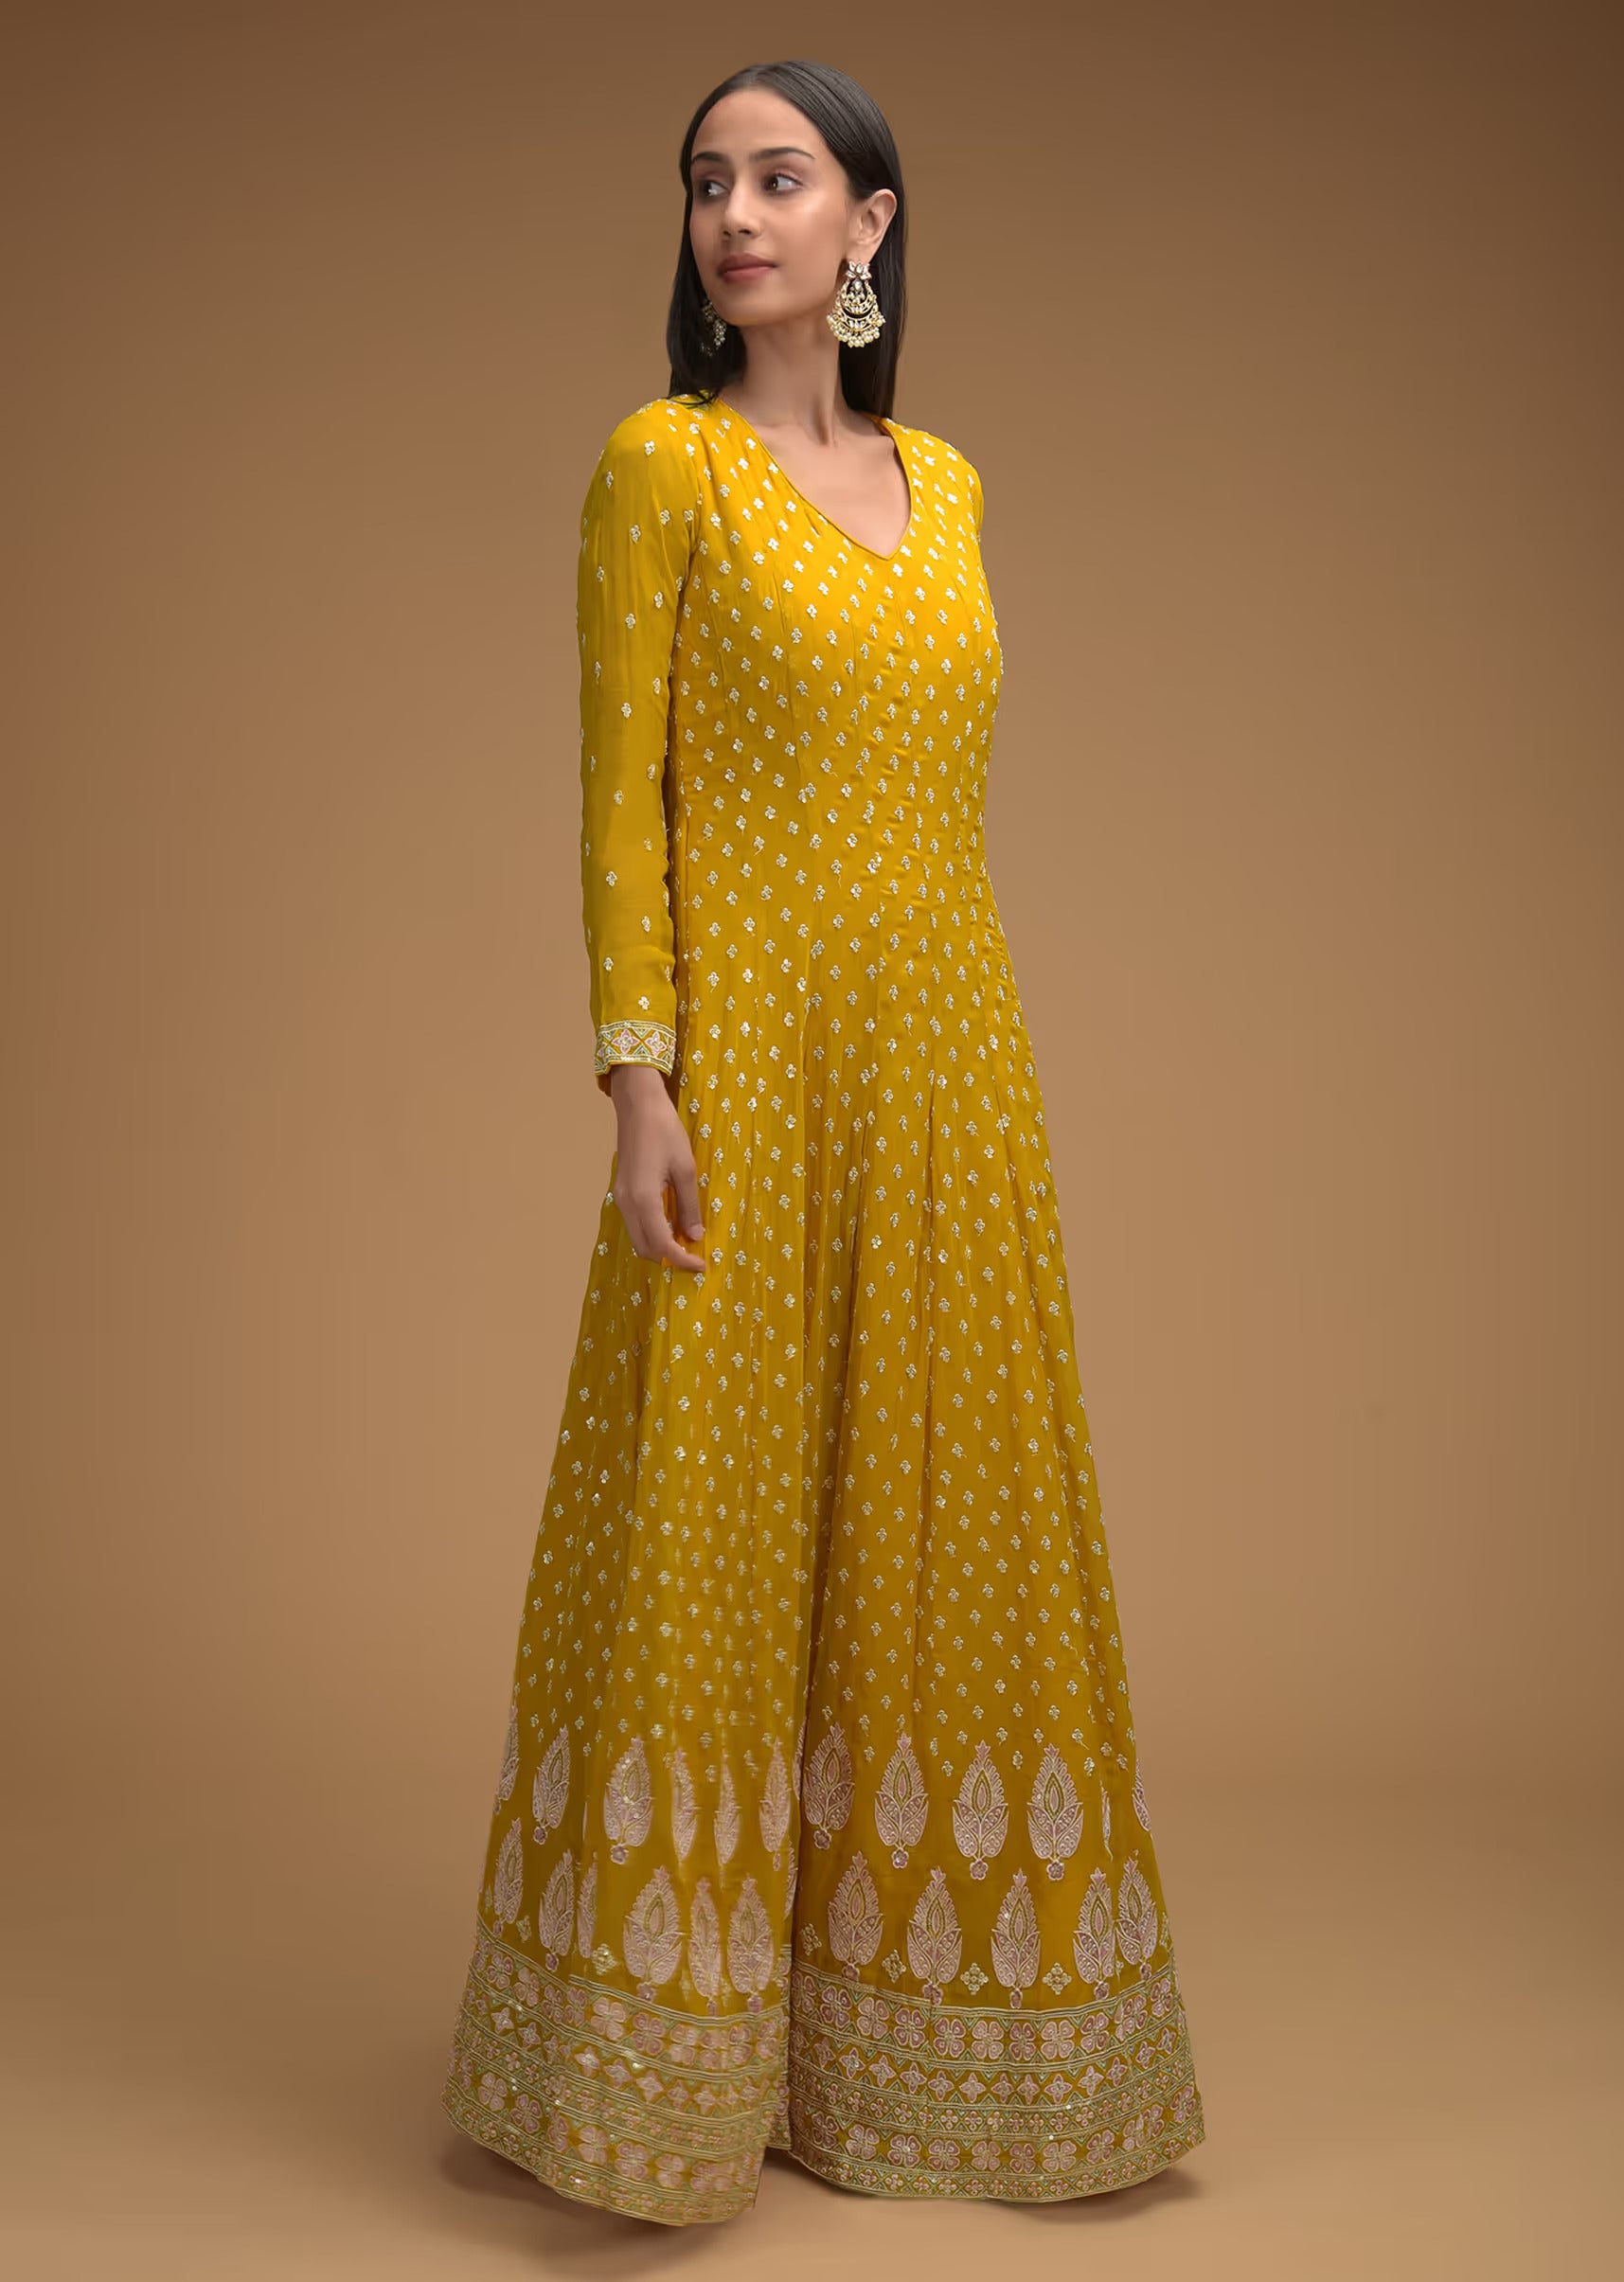 Yellow Anarkali Gown In Georgette With Resham And Embroidered Buttis And Border Design